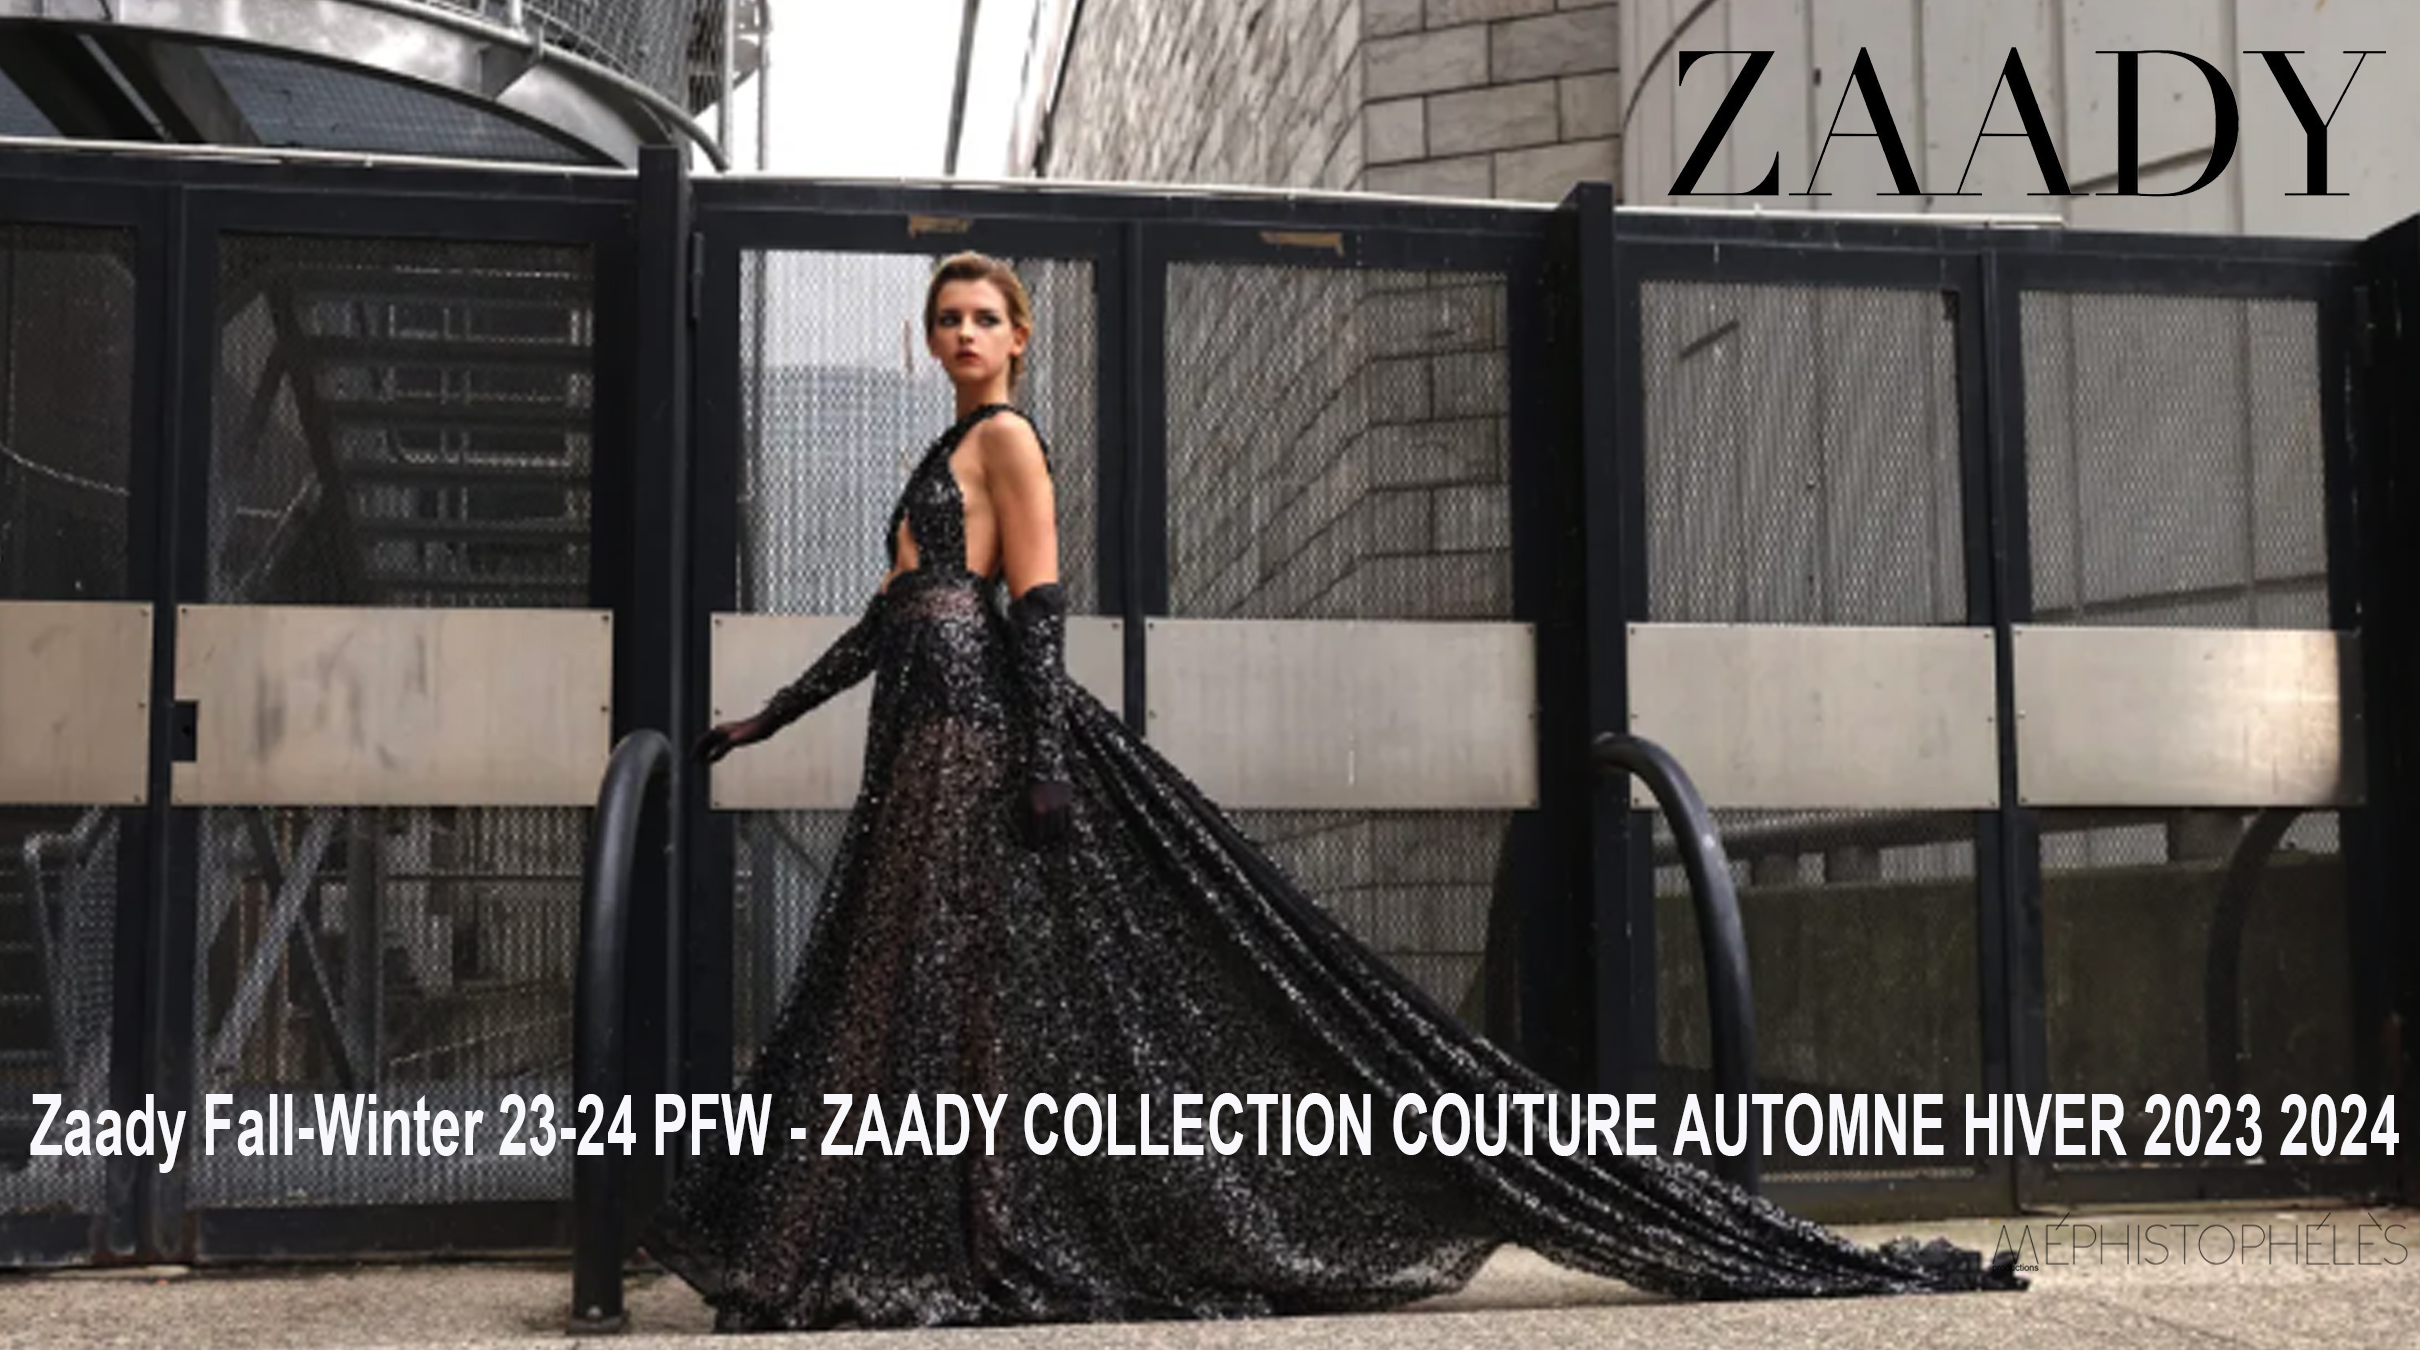 AFRICA-VOGUE-COVER-Zaady-Fall-Winter-23-24-PFW-ZAADY-COLLECTION-COUTURE-AUTOMNE-HIVER-2023-2024-DN-AFRICA-Media-Partner